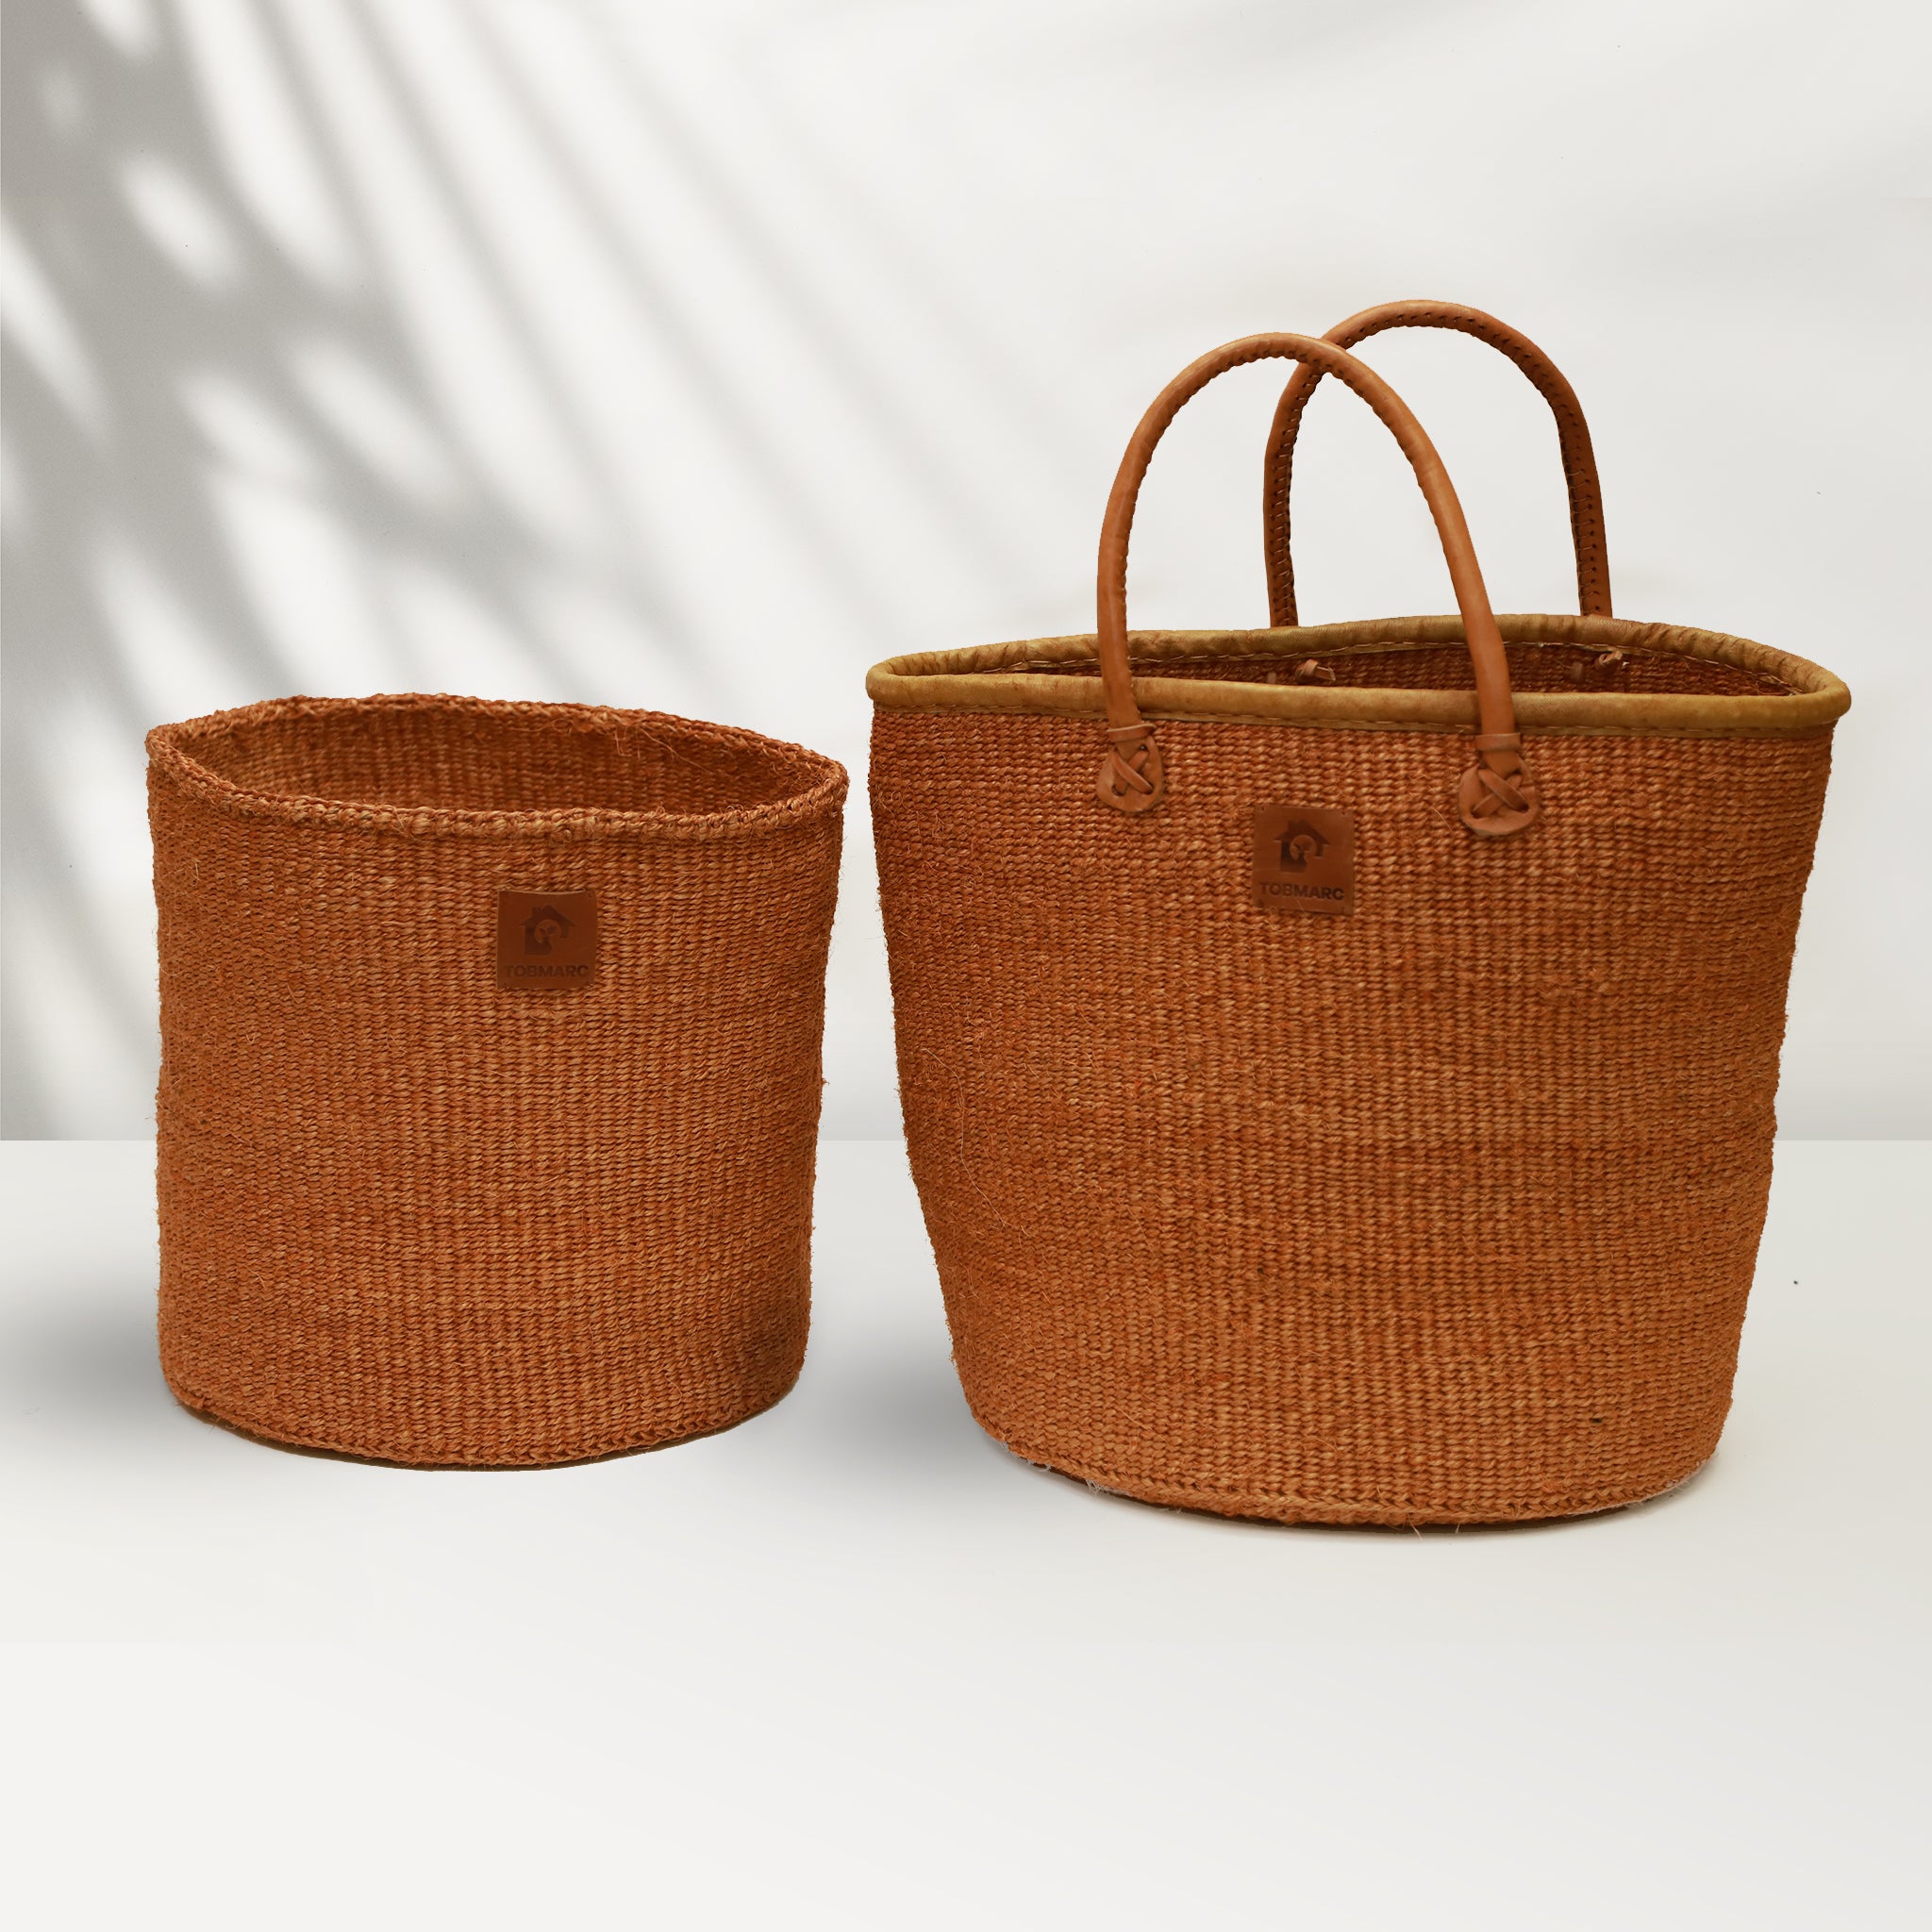 EARTHTONE2- WOVEN BASKETbasket, African basket, Market basket with leather handles, Woven tote bags, African storage basket, Gift for her, African bags - Tobmarc Home Decor & Gifts 